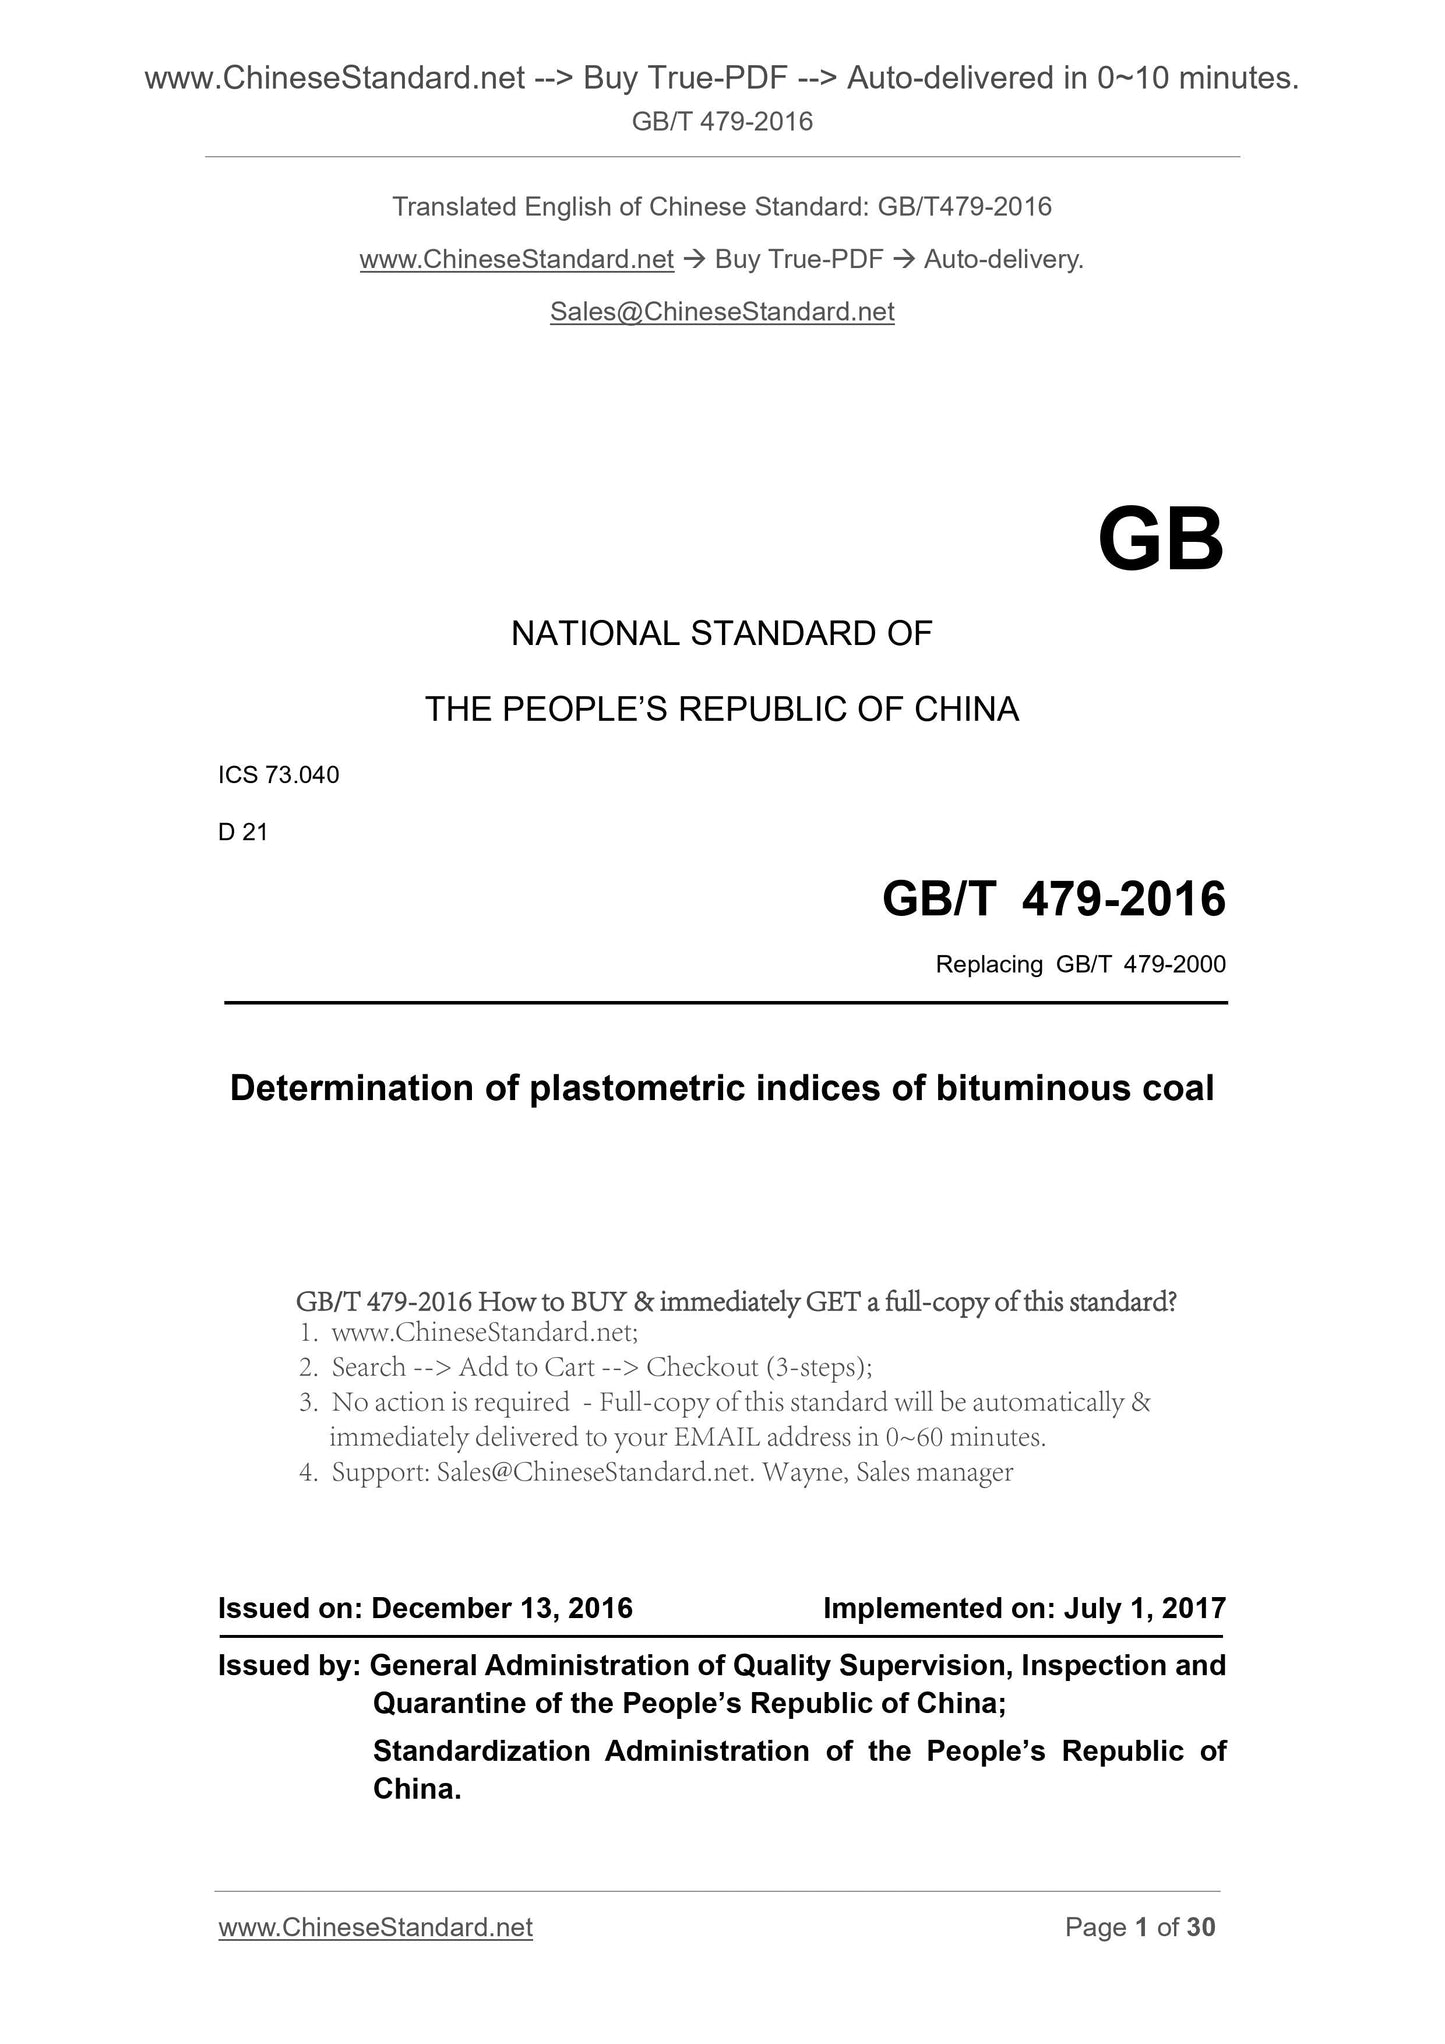 GB/T 479-2016 Page 1